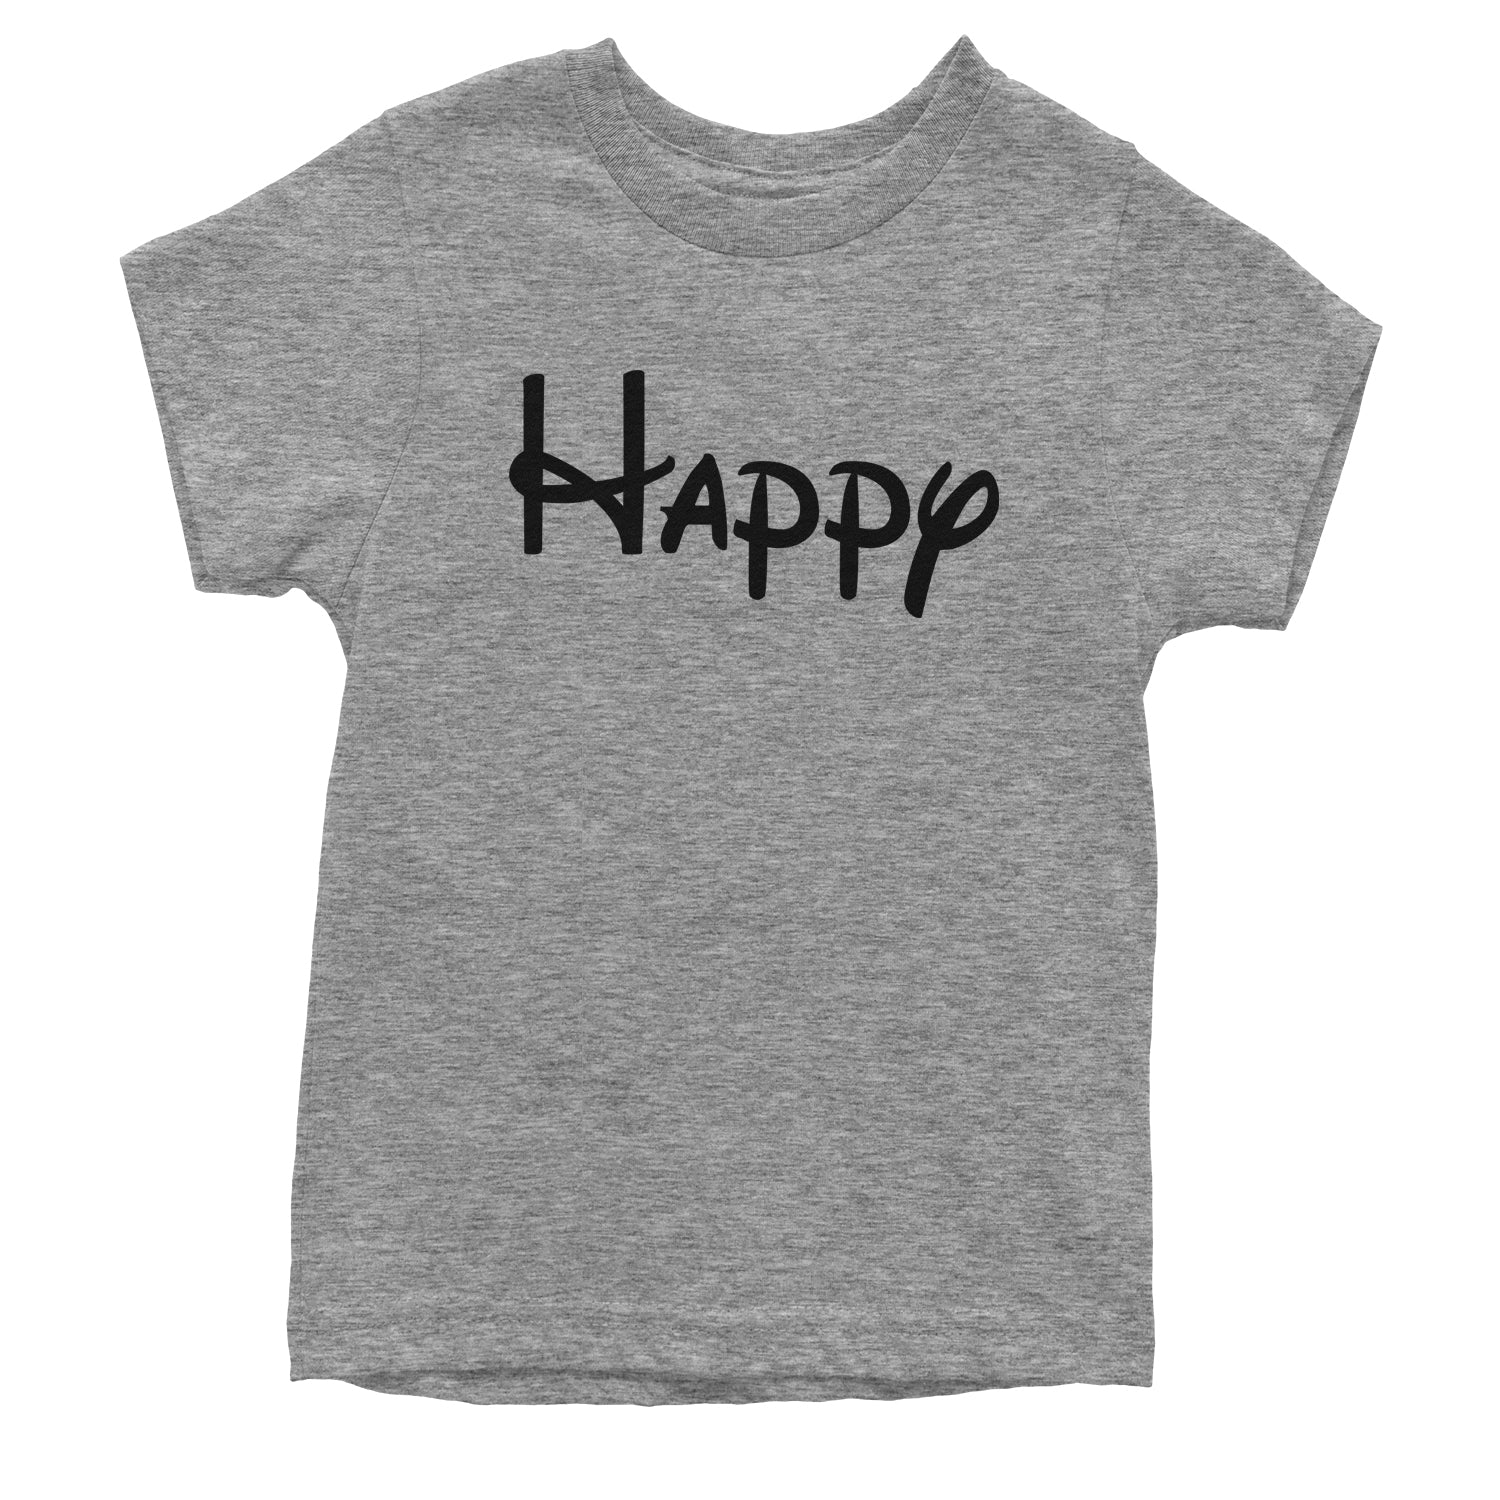 Happy - 7 Dwarfs Costume Youth T-shirt and, costume, dwarfs, group, halloween, matching, seven, snow, the, white by Expression Tees